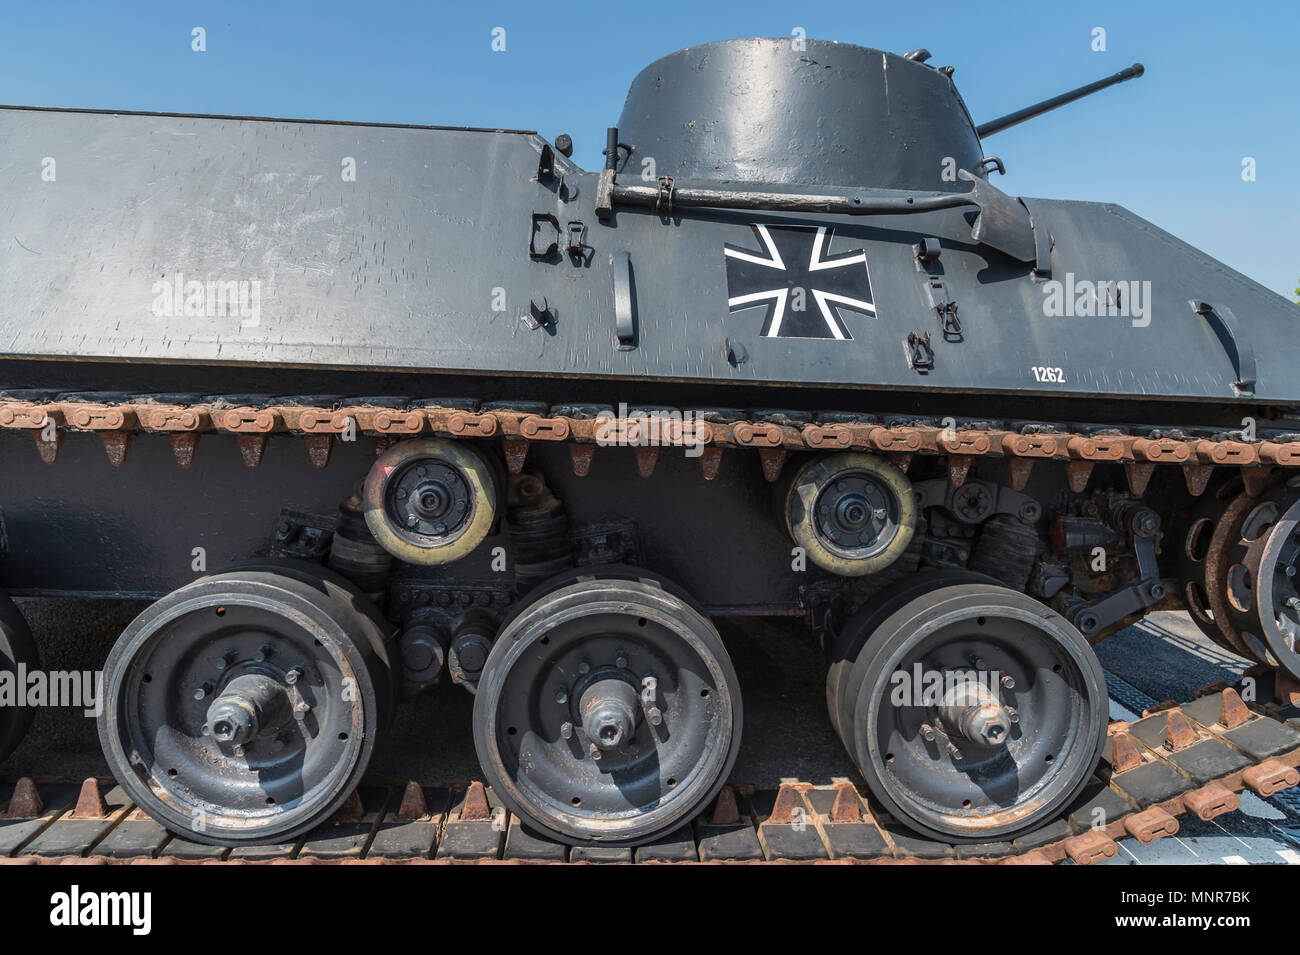 German tank stock photography and images Alamy